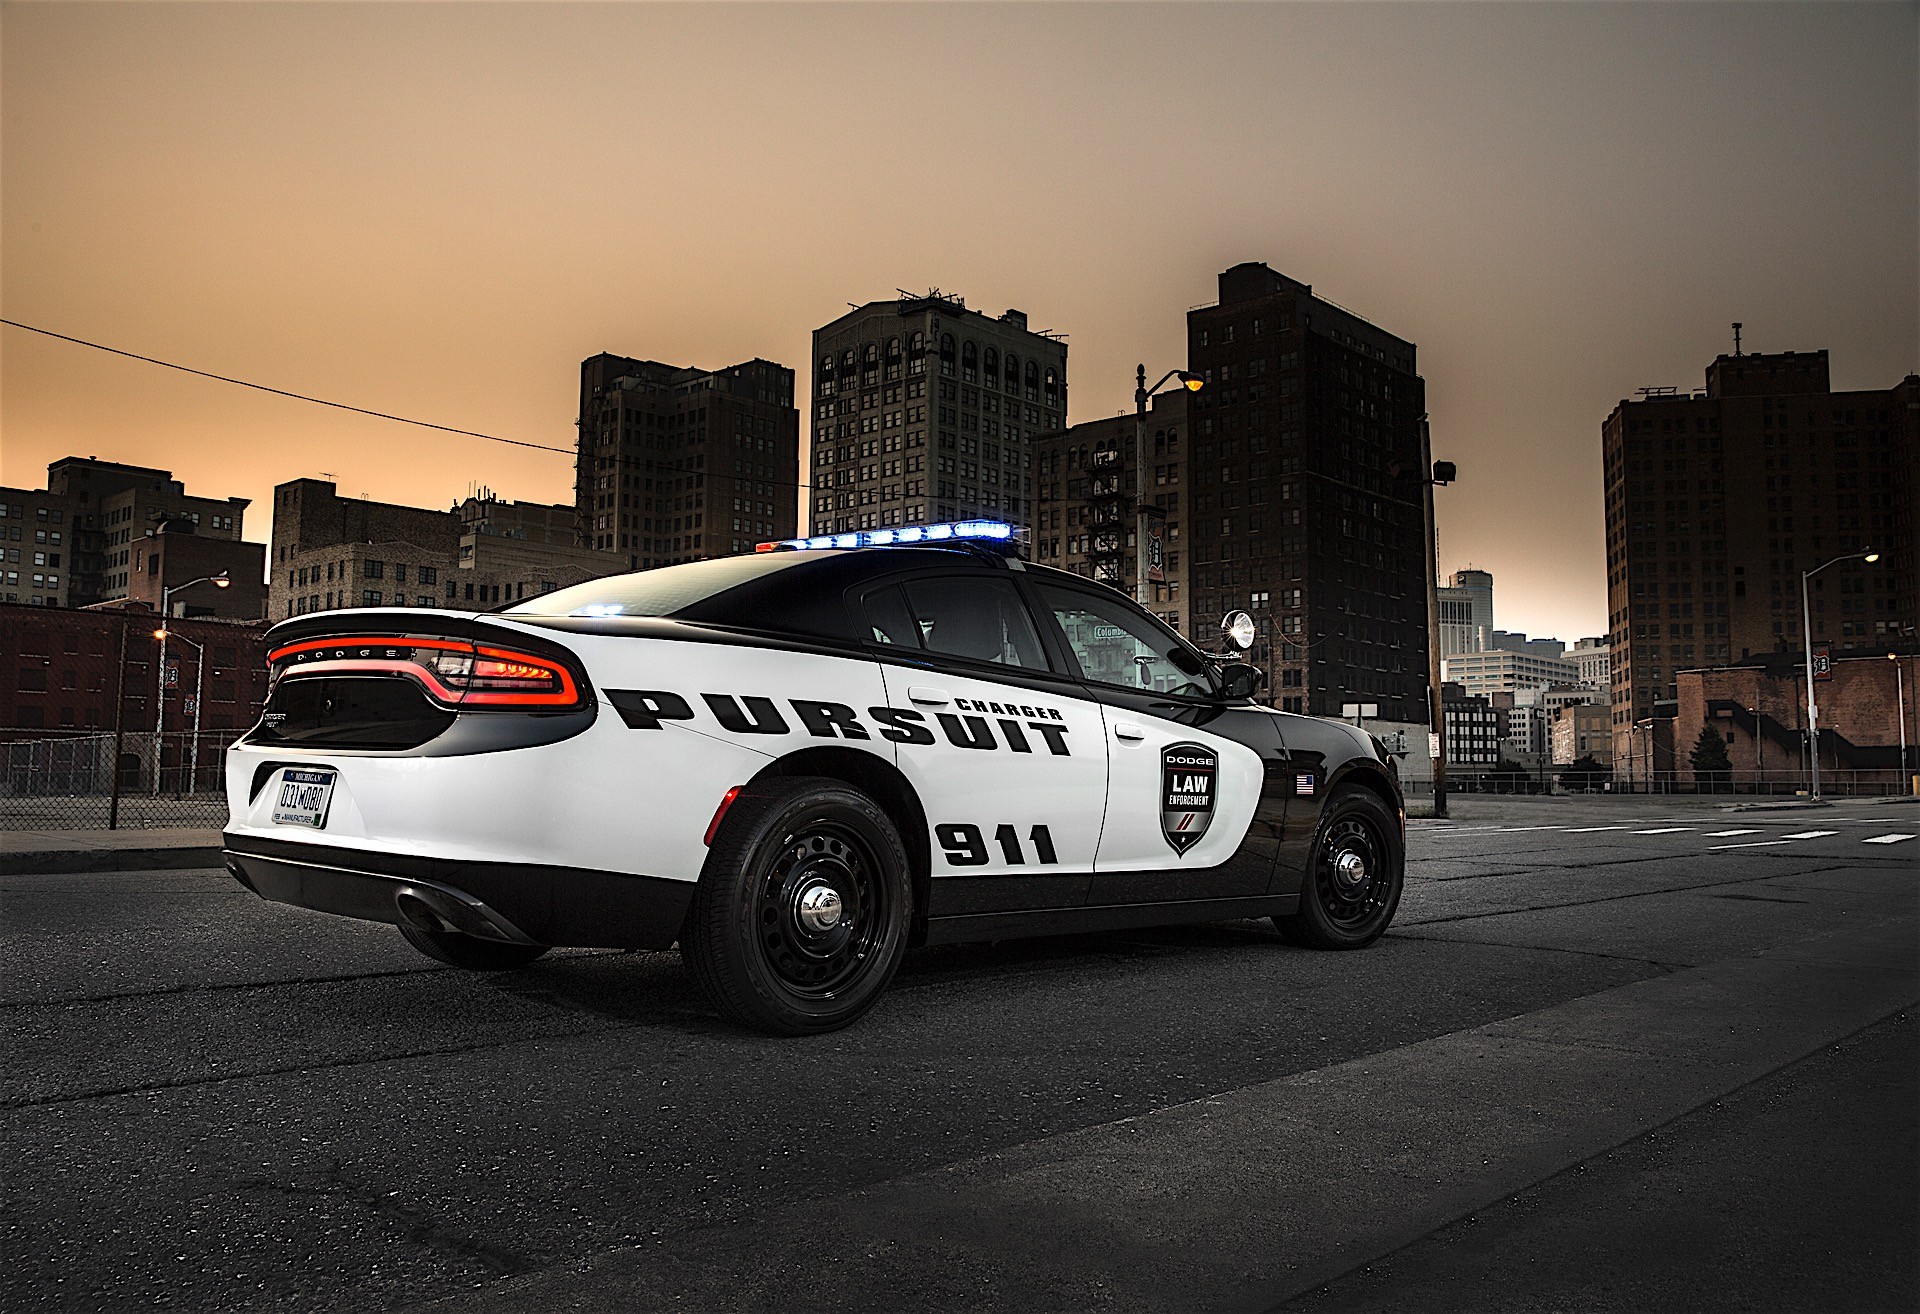 California Highway Patrol Introduces Fleet of Dodge Charger Pursuit